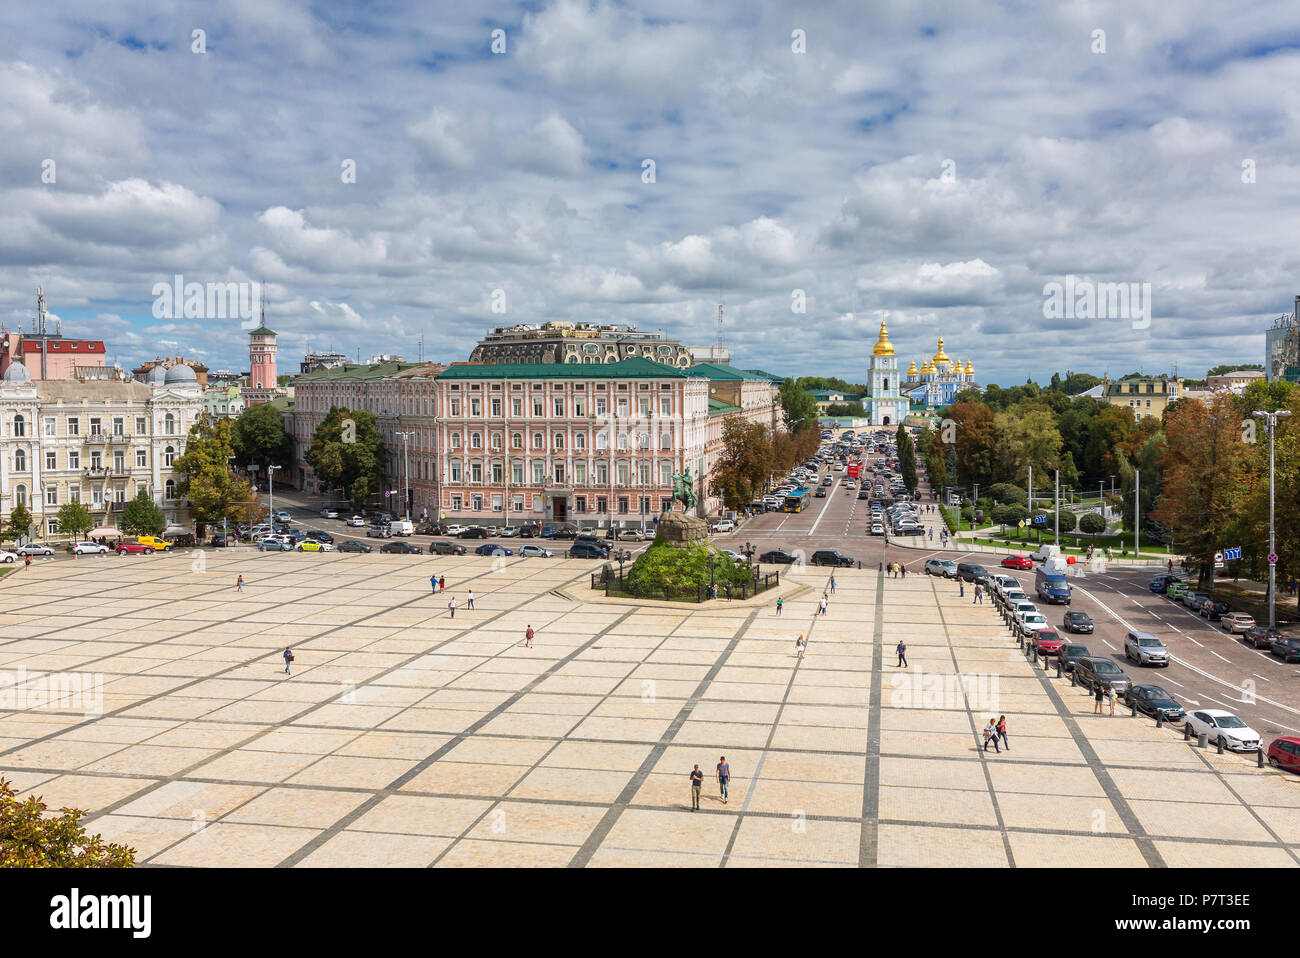 Kiev, Ukraine - August 8, 2017: Sophievskaya Square. View from Bell tower of the Saint Sophia Cathedral. Stock Photo